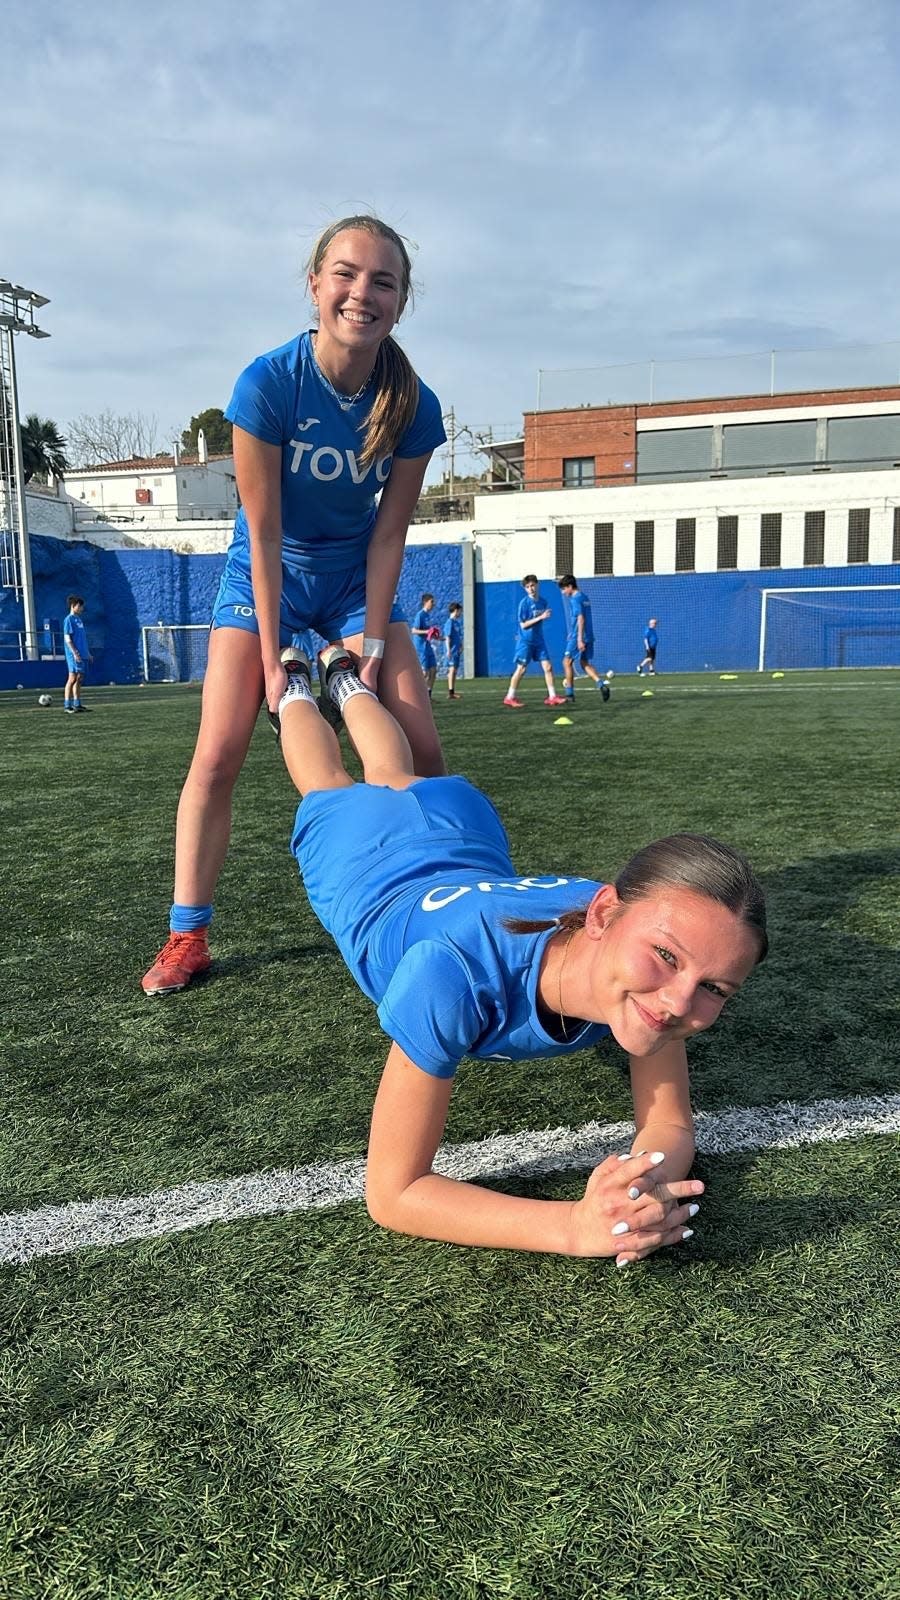 Leah Schamberg and teammate Lucy Lundblad perform a "dual force" exercise during soccer warmups while at the TOVO Academy in Spain.